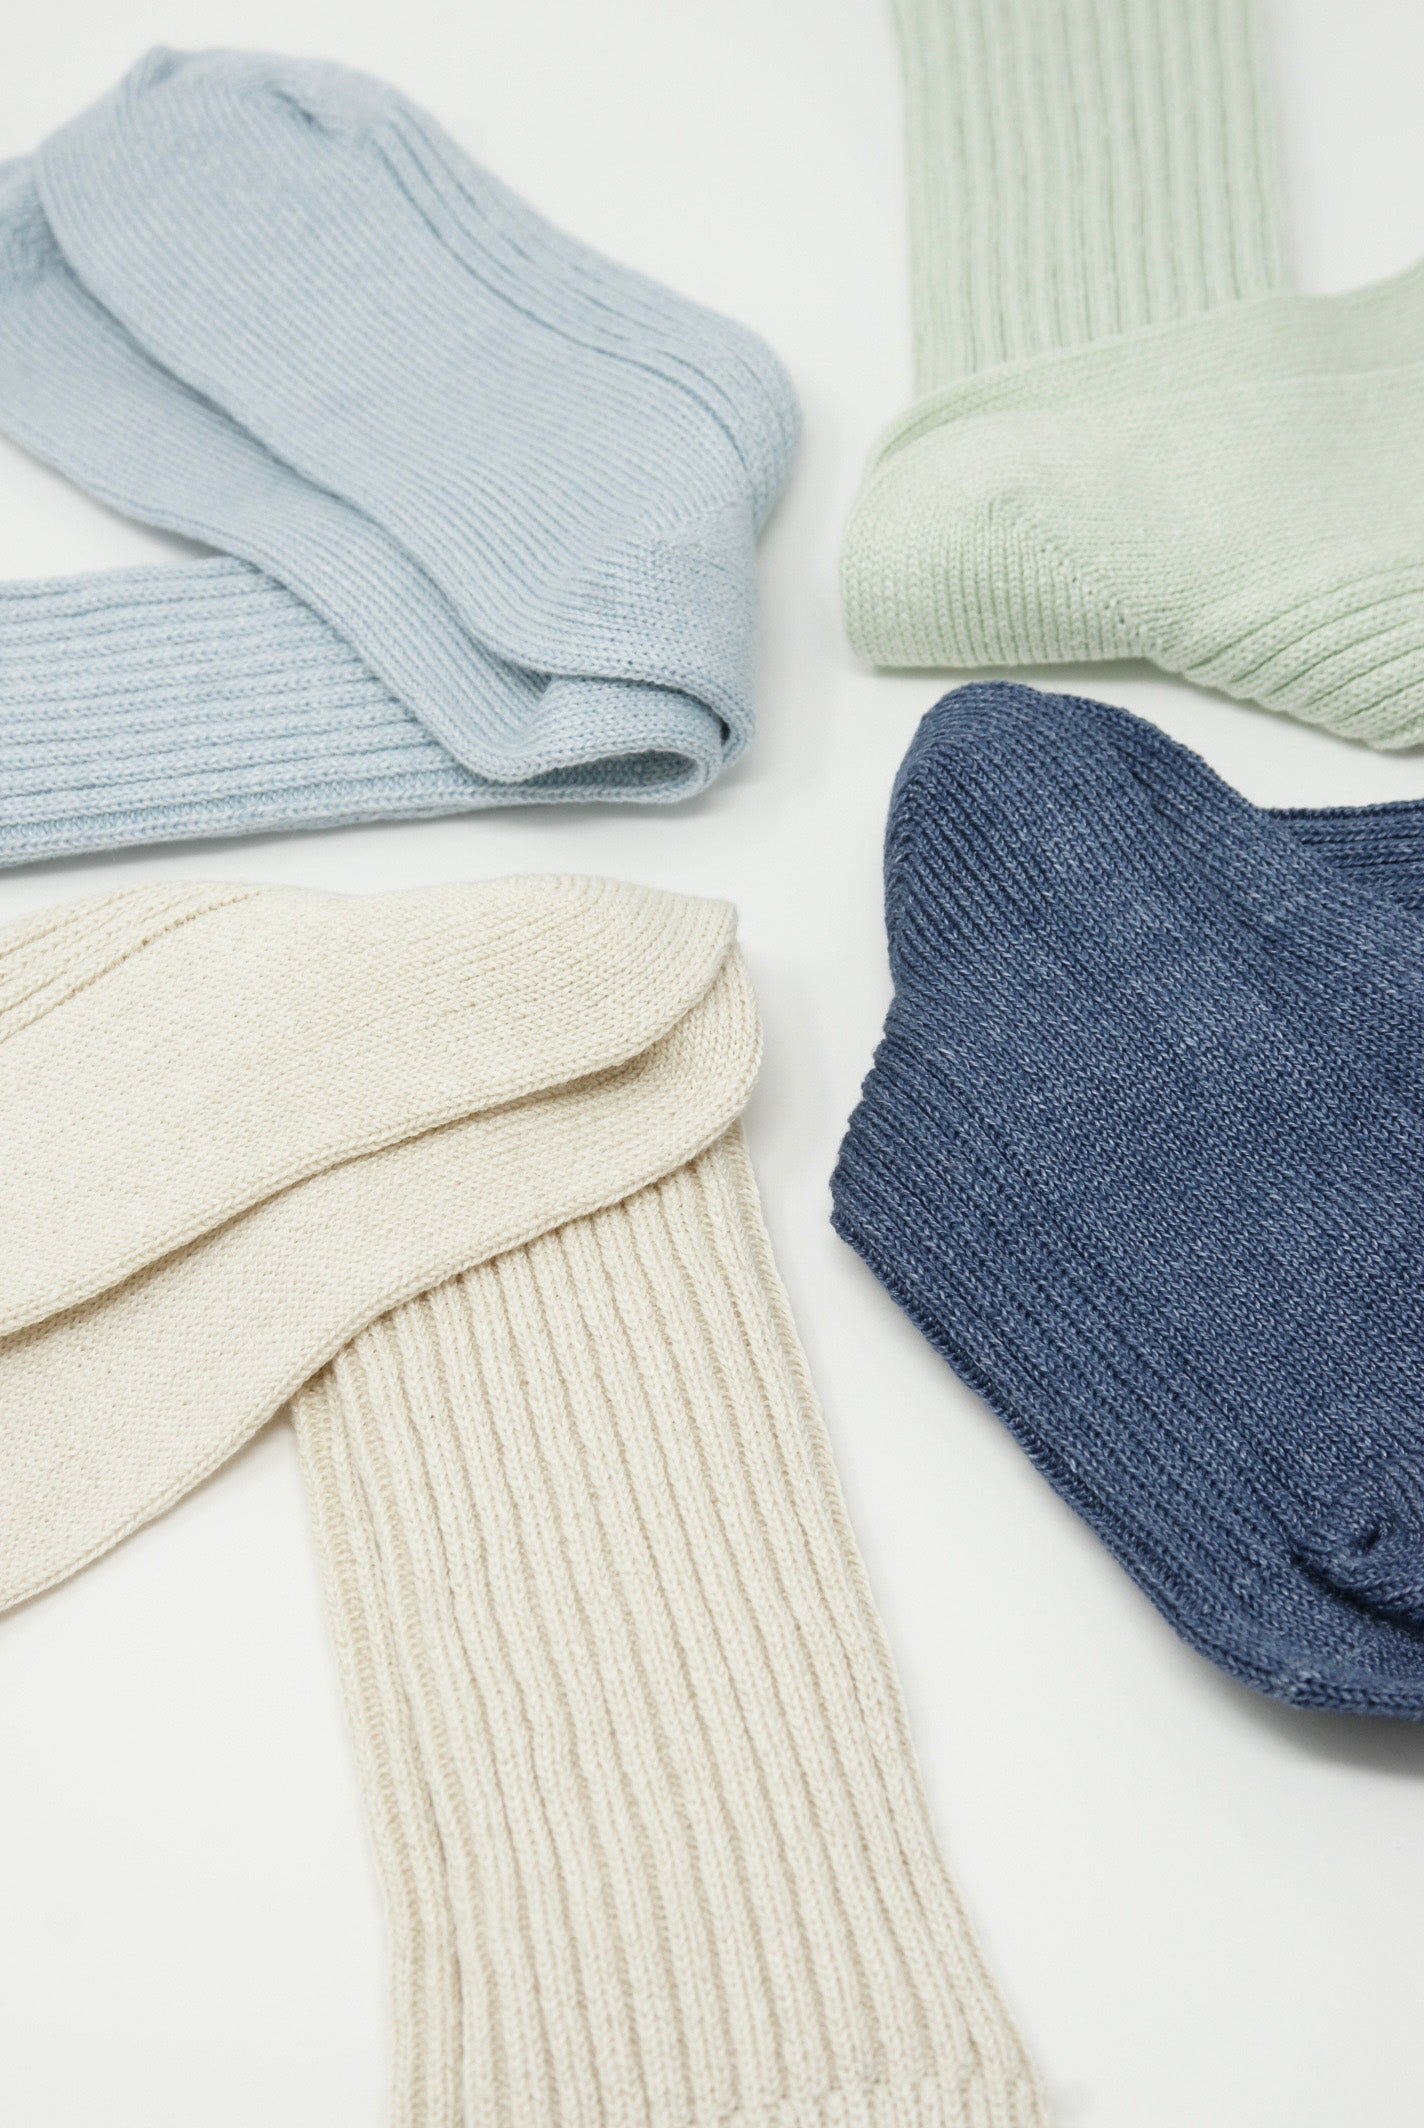 Four pairs of Linen Rib Socks in Blue by Ichi Antiquités on a white surface. Available at Oroboro Store.